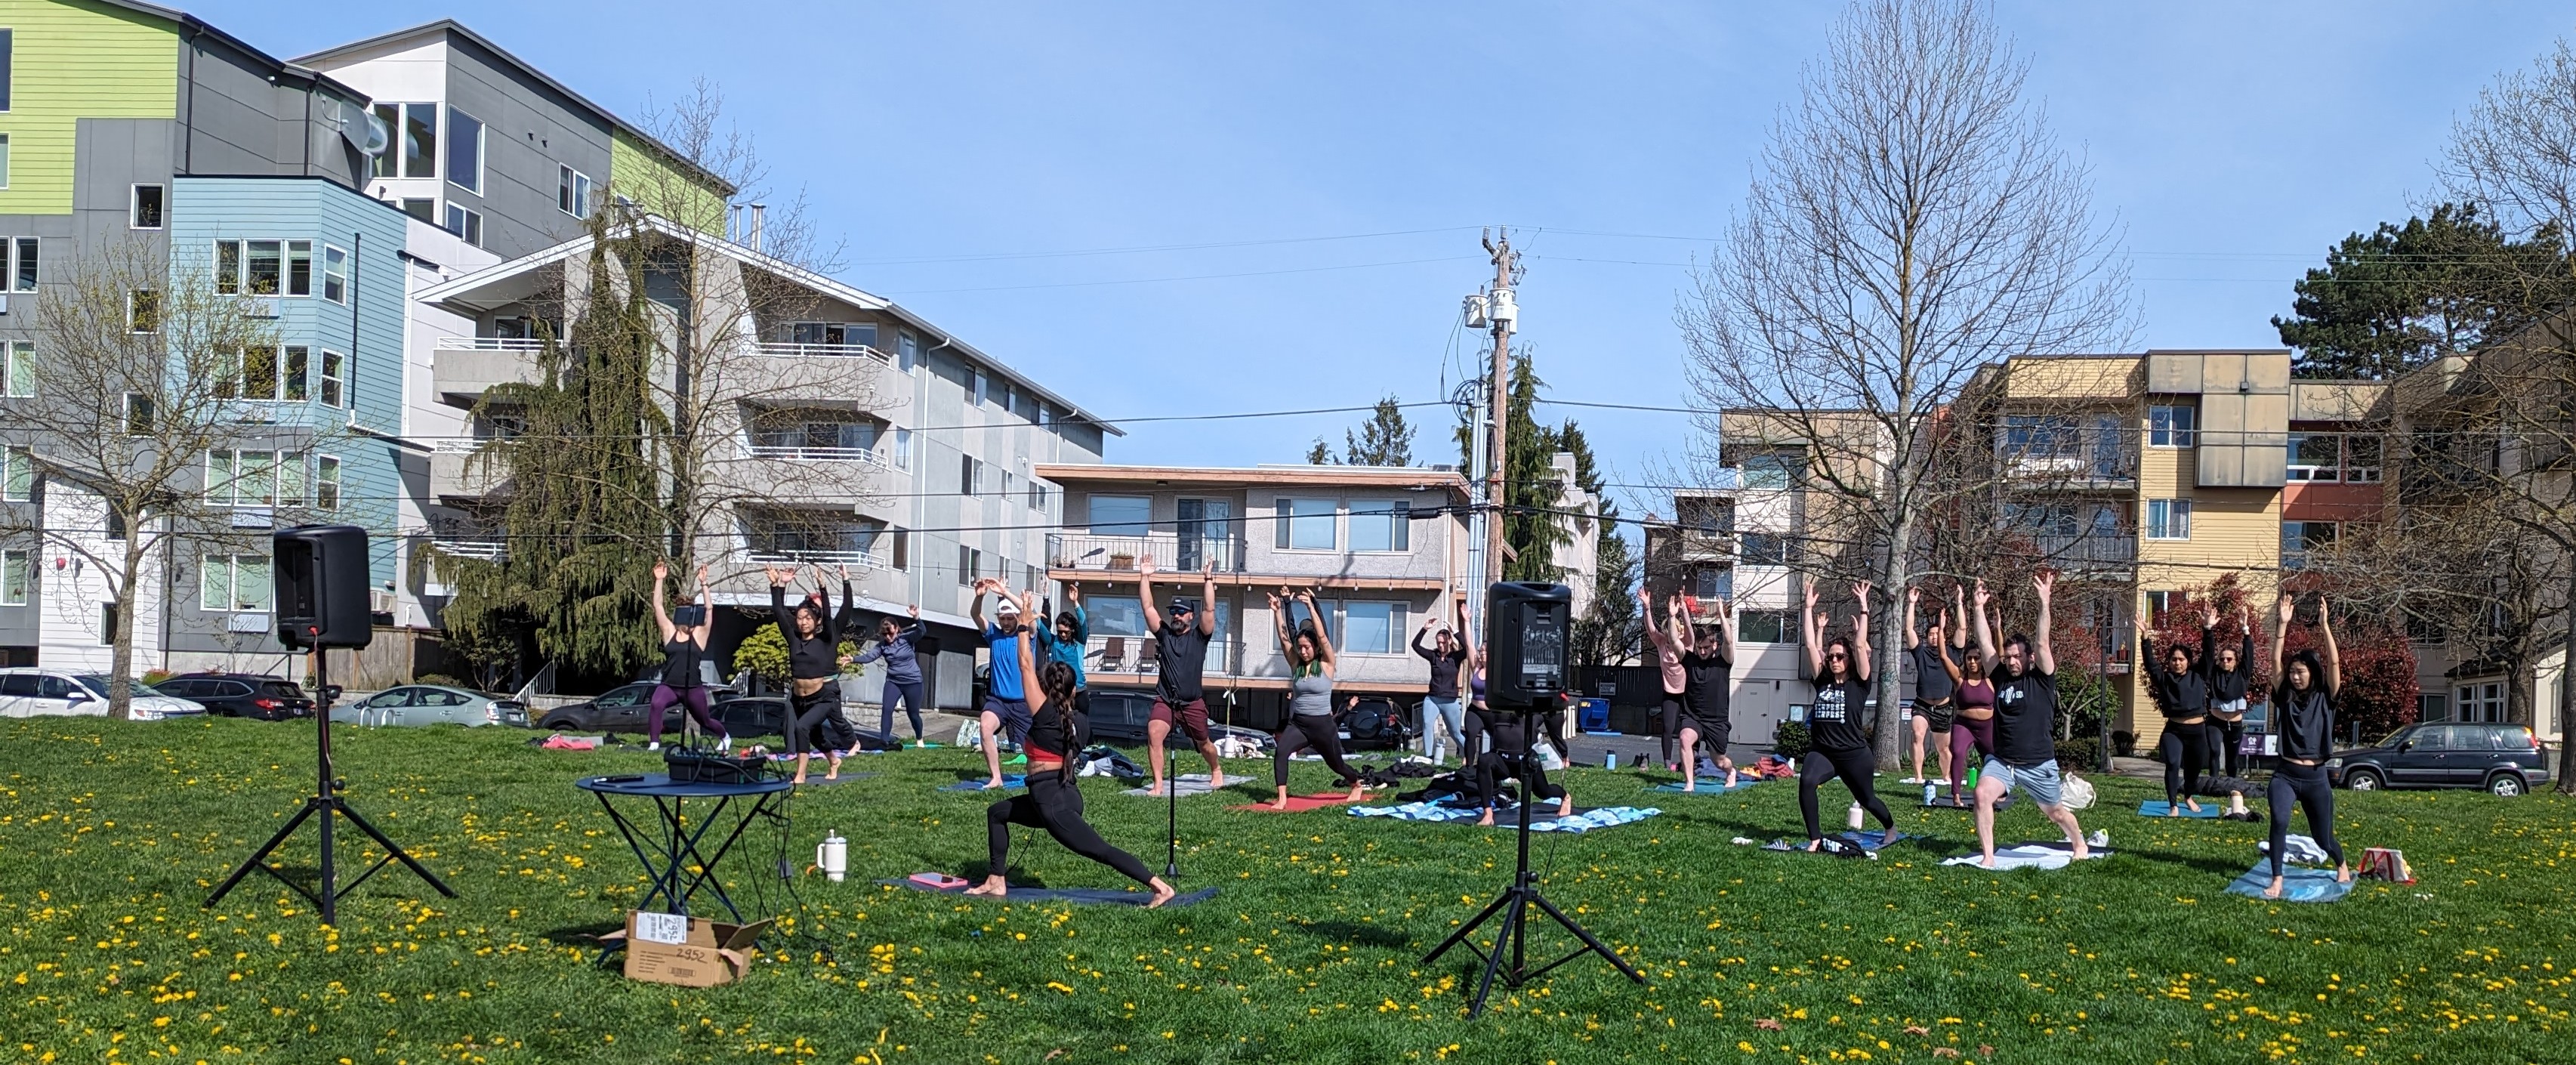 Yoga class at Ballard Commons Park in the grass